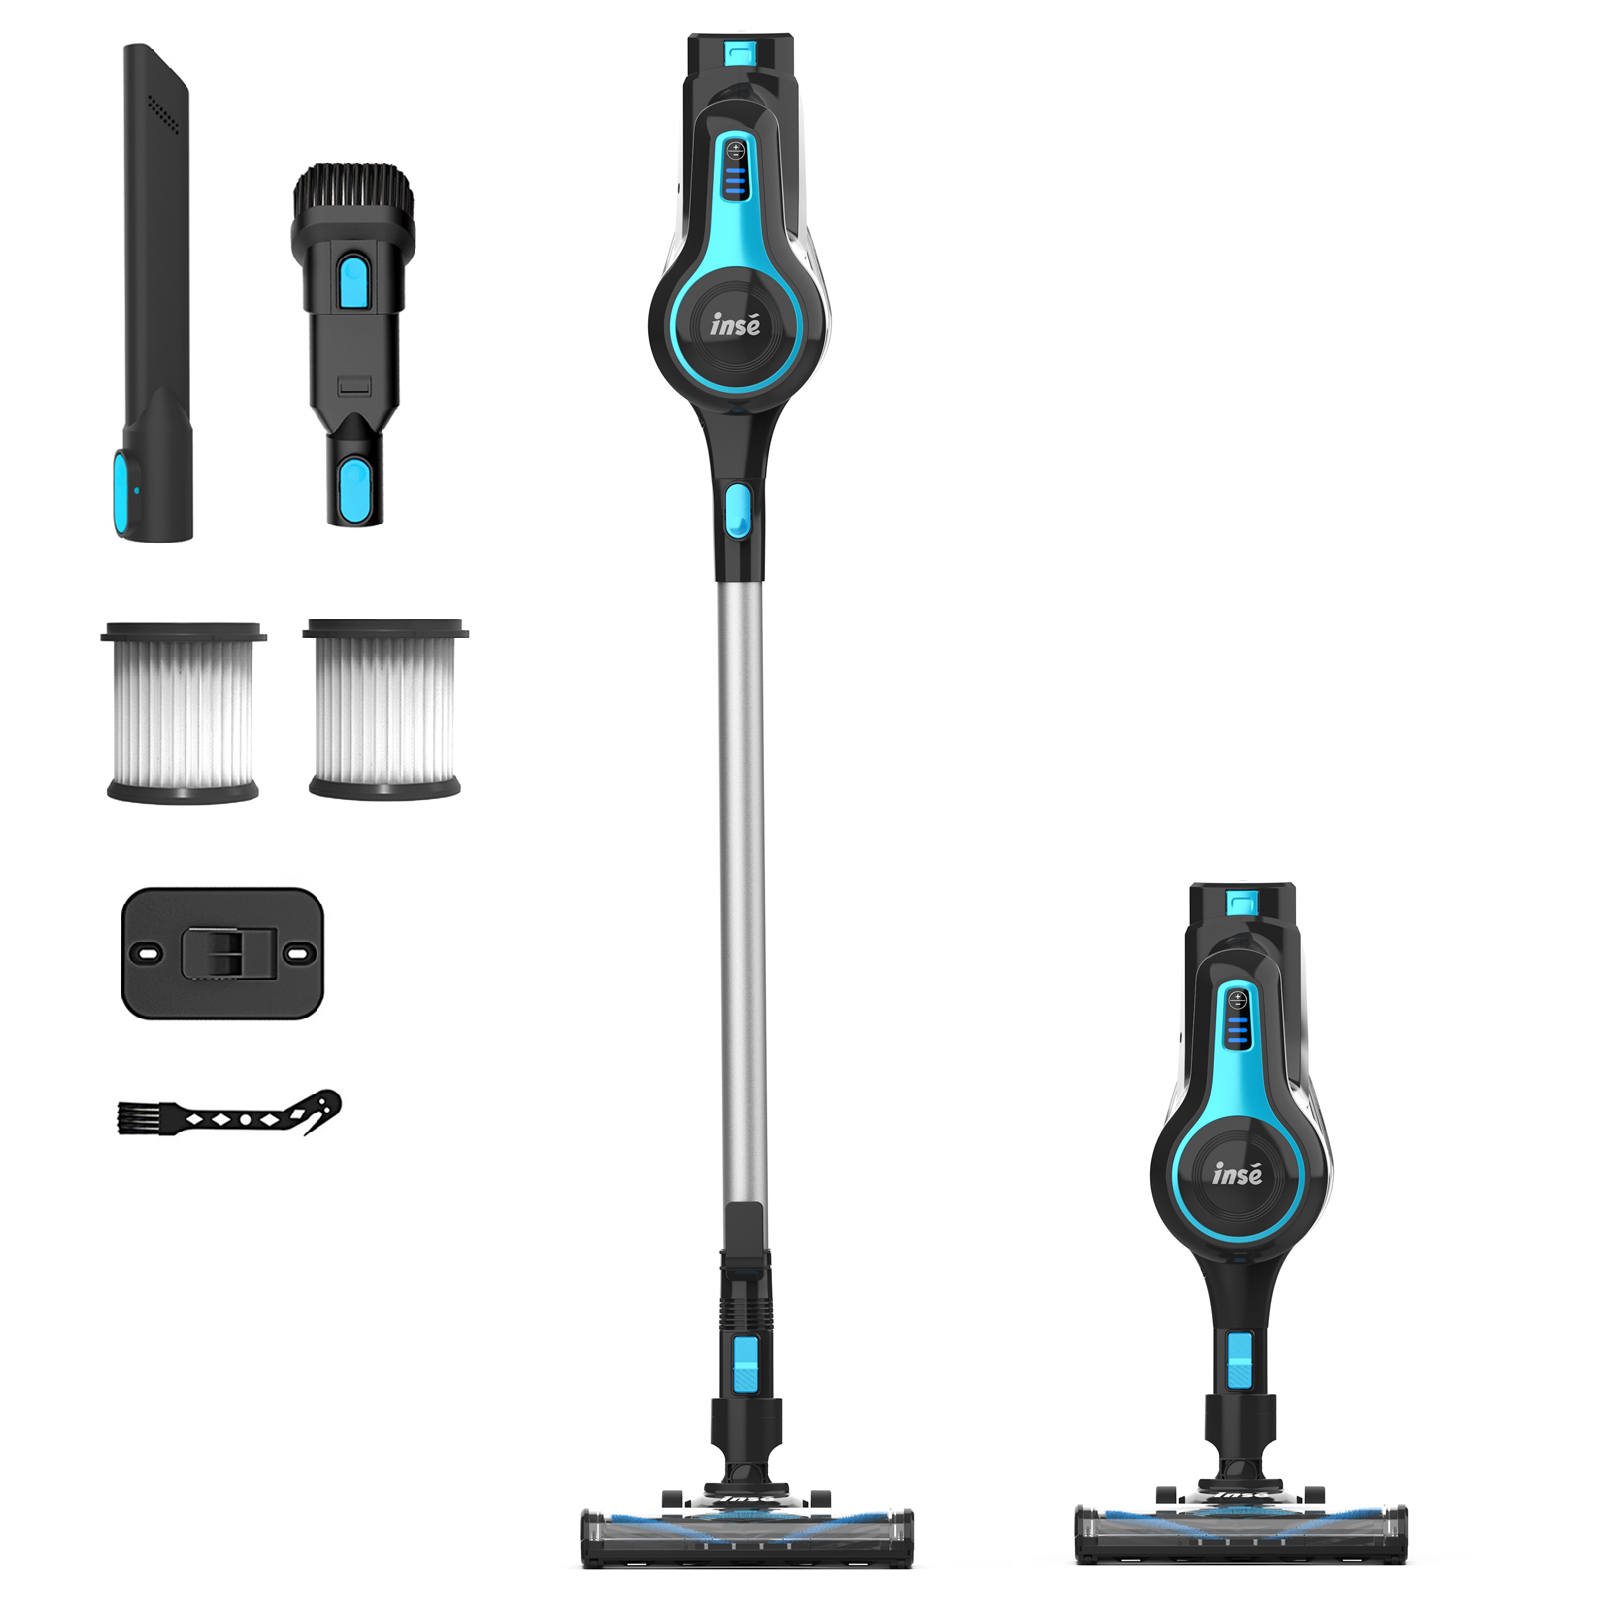 INSE Cordless Vacuum Cleaner, 6 in 1 Powerful Suction Lightweight Stick Vacuum with 2200mAh Rechargeable Battery, up to 45min Runtime, for Home Furniture Hard Floor Carpet Car Hair - image 1 of 12